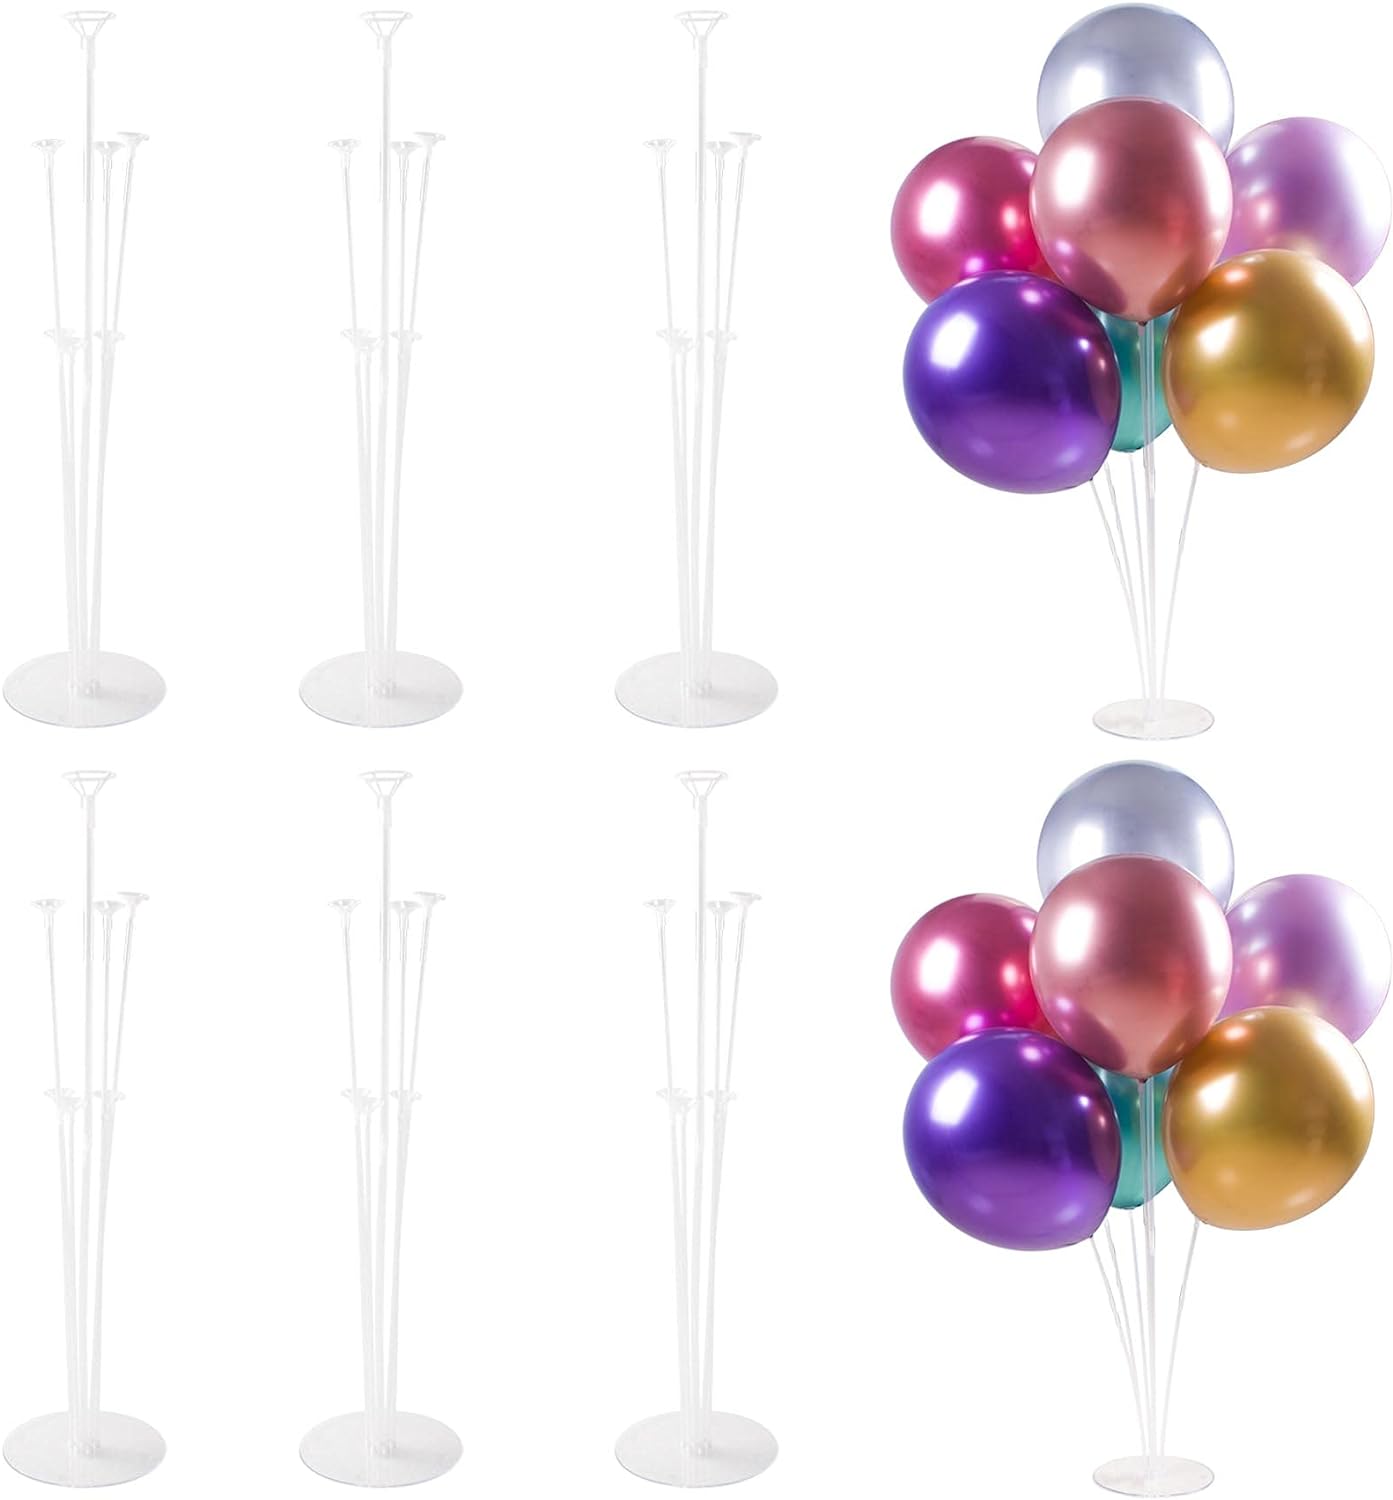 6 Sets Balloon Stand Kit, Table Balloon Stand Holder, Reusable Centerpiece with Base for Birthday Decorations, Party, Wedding and Graduation Decorations